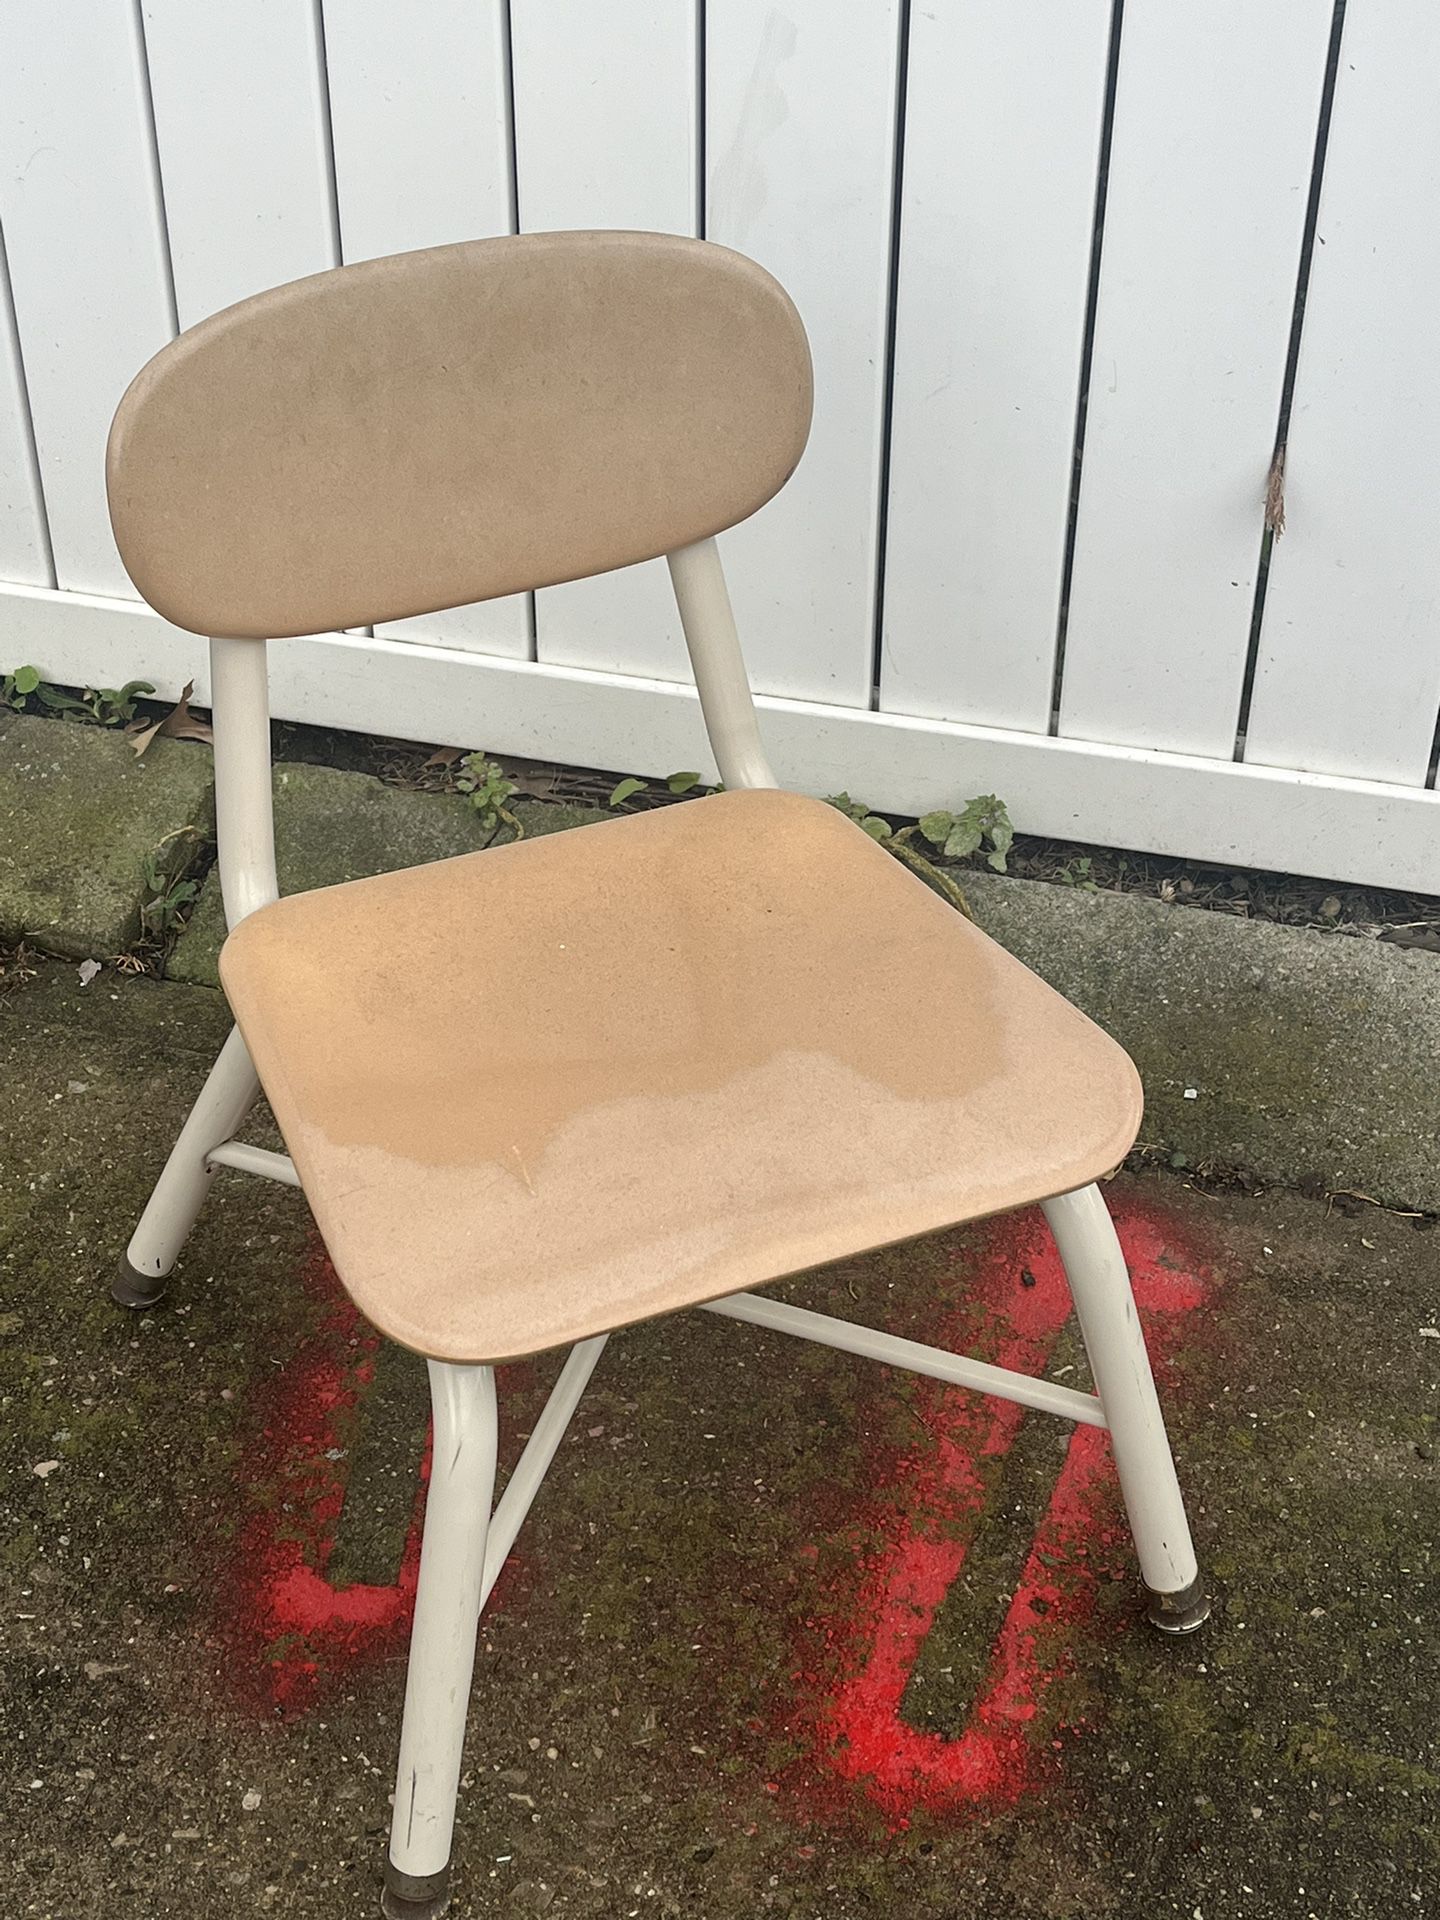 Child Size Chair 